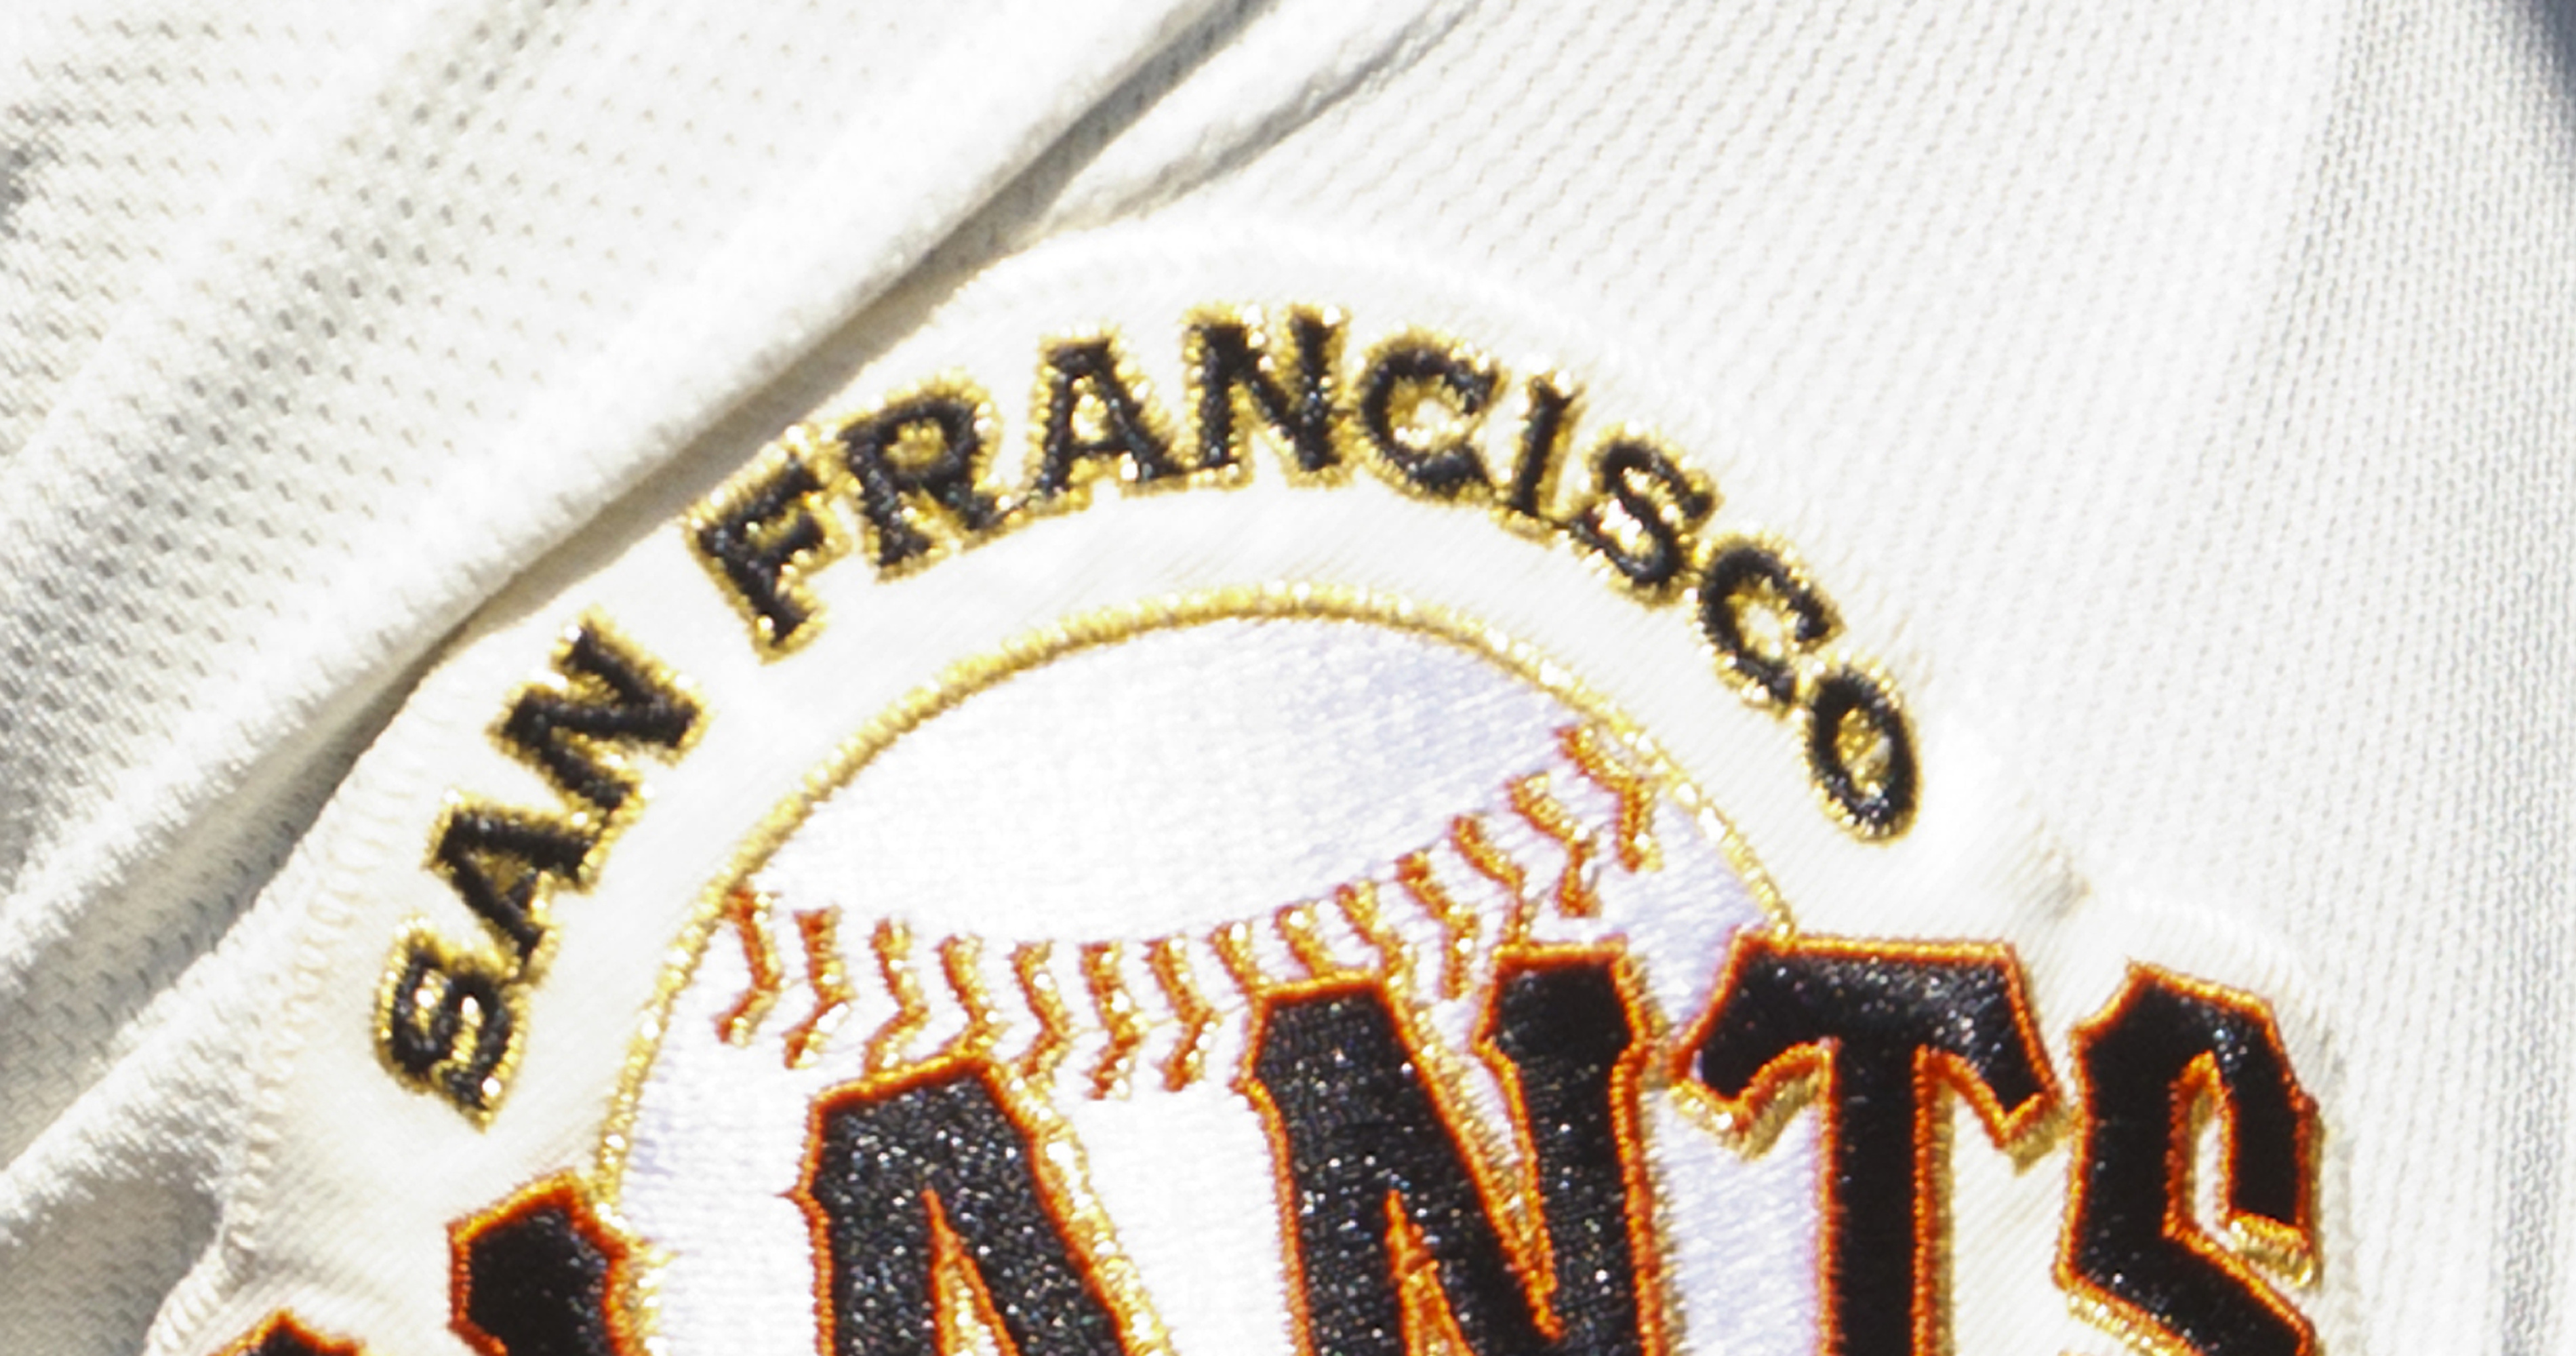 San Francisco Giants - Pick 3 #SFGiants jerseys. Which jerseys are you  picking?